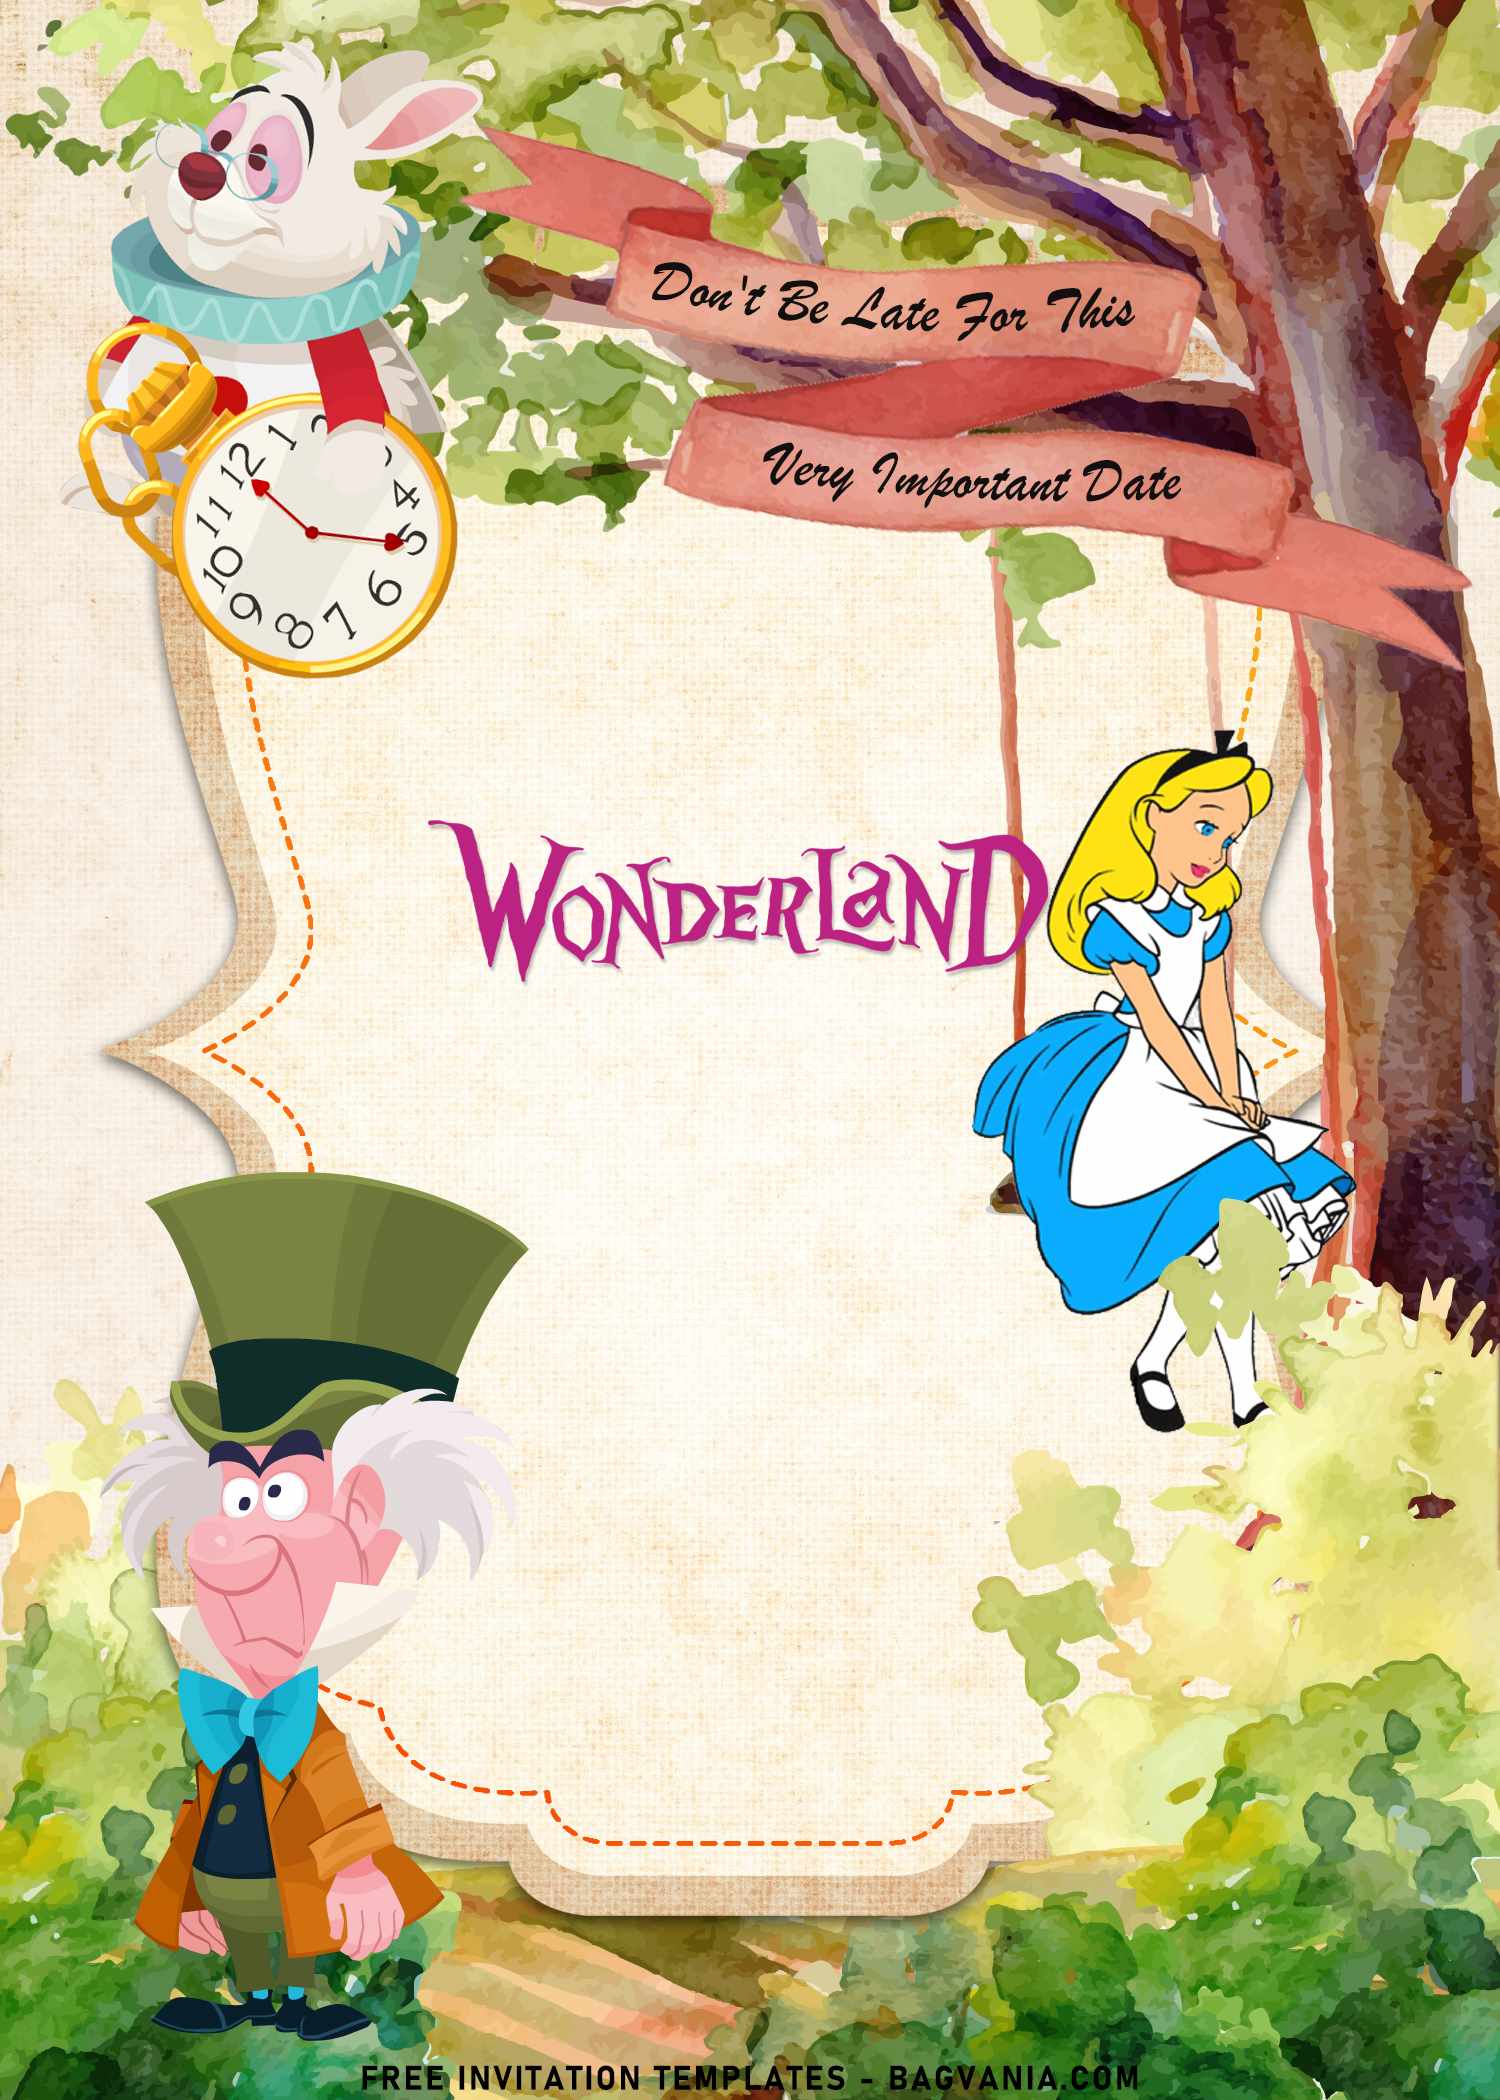 alice-in-wonderland-party-invitations-template